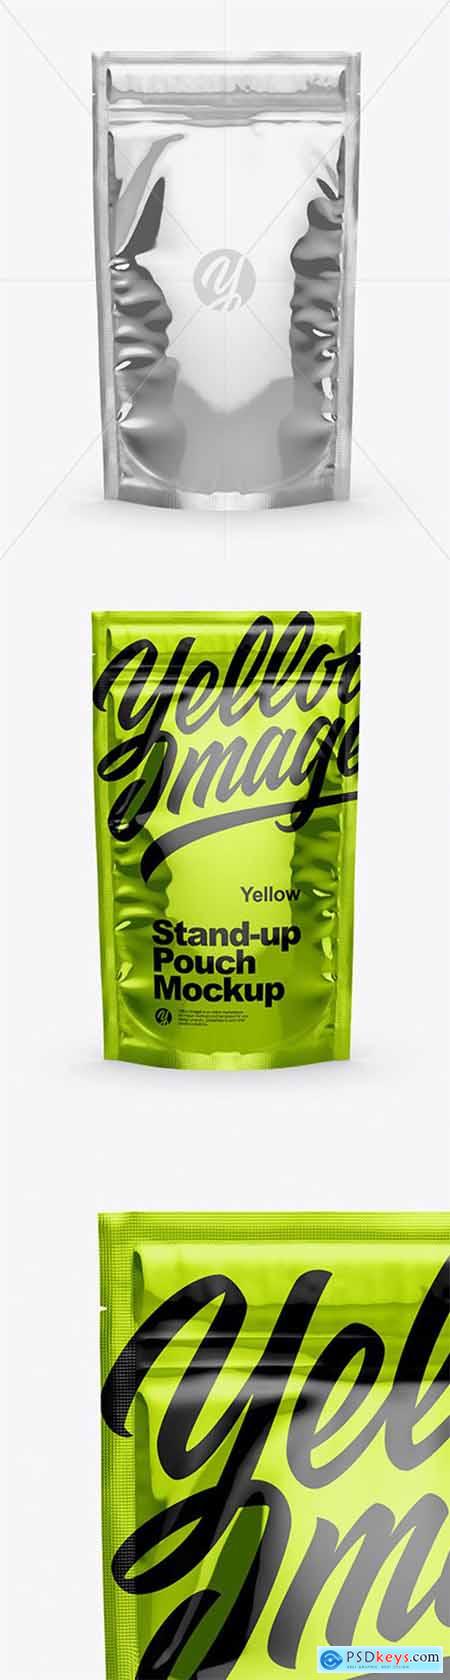 Glossy Metallic Stand Up Pouch with Zipper Mockup 51162